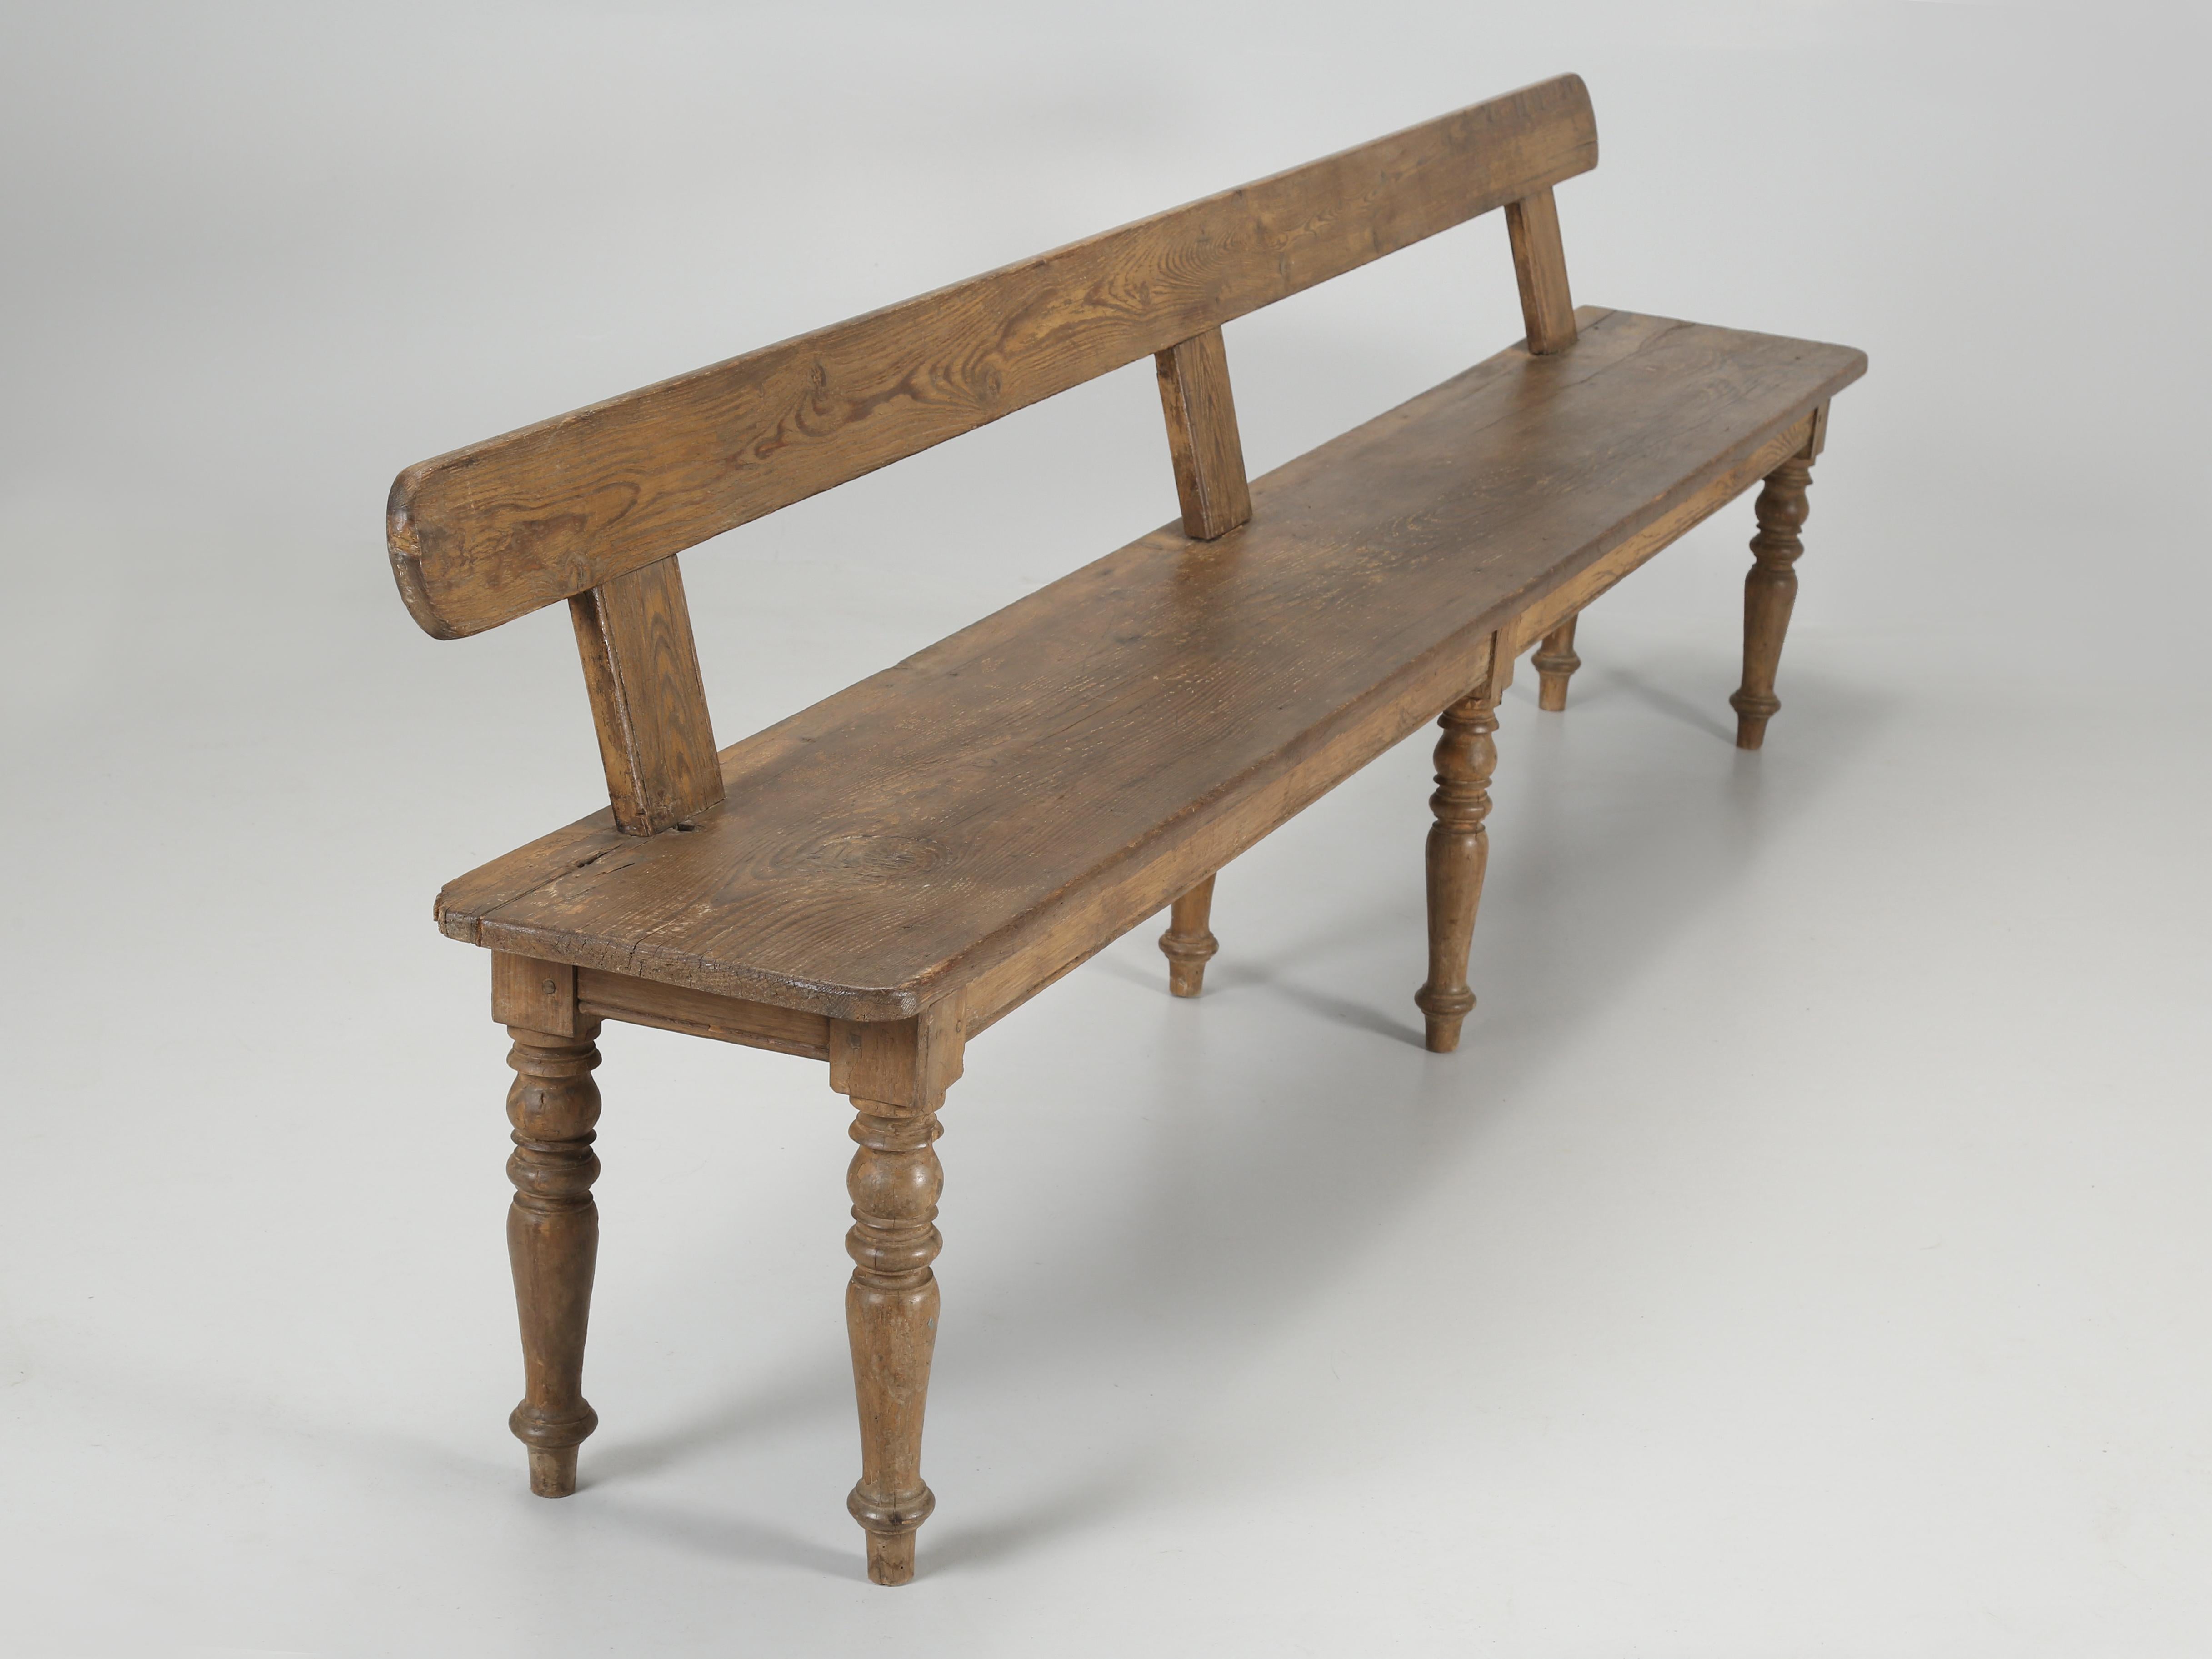 Country Antique English Oak Bench Comfortable Great Patina Original Finish Late 1800's